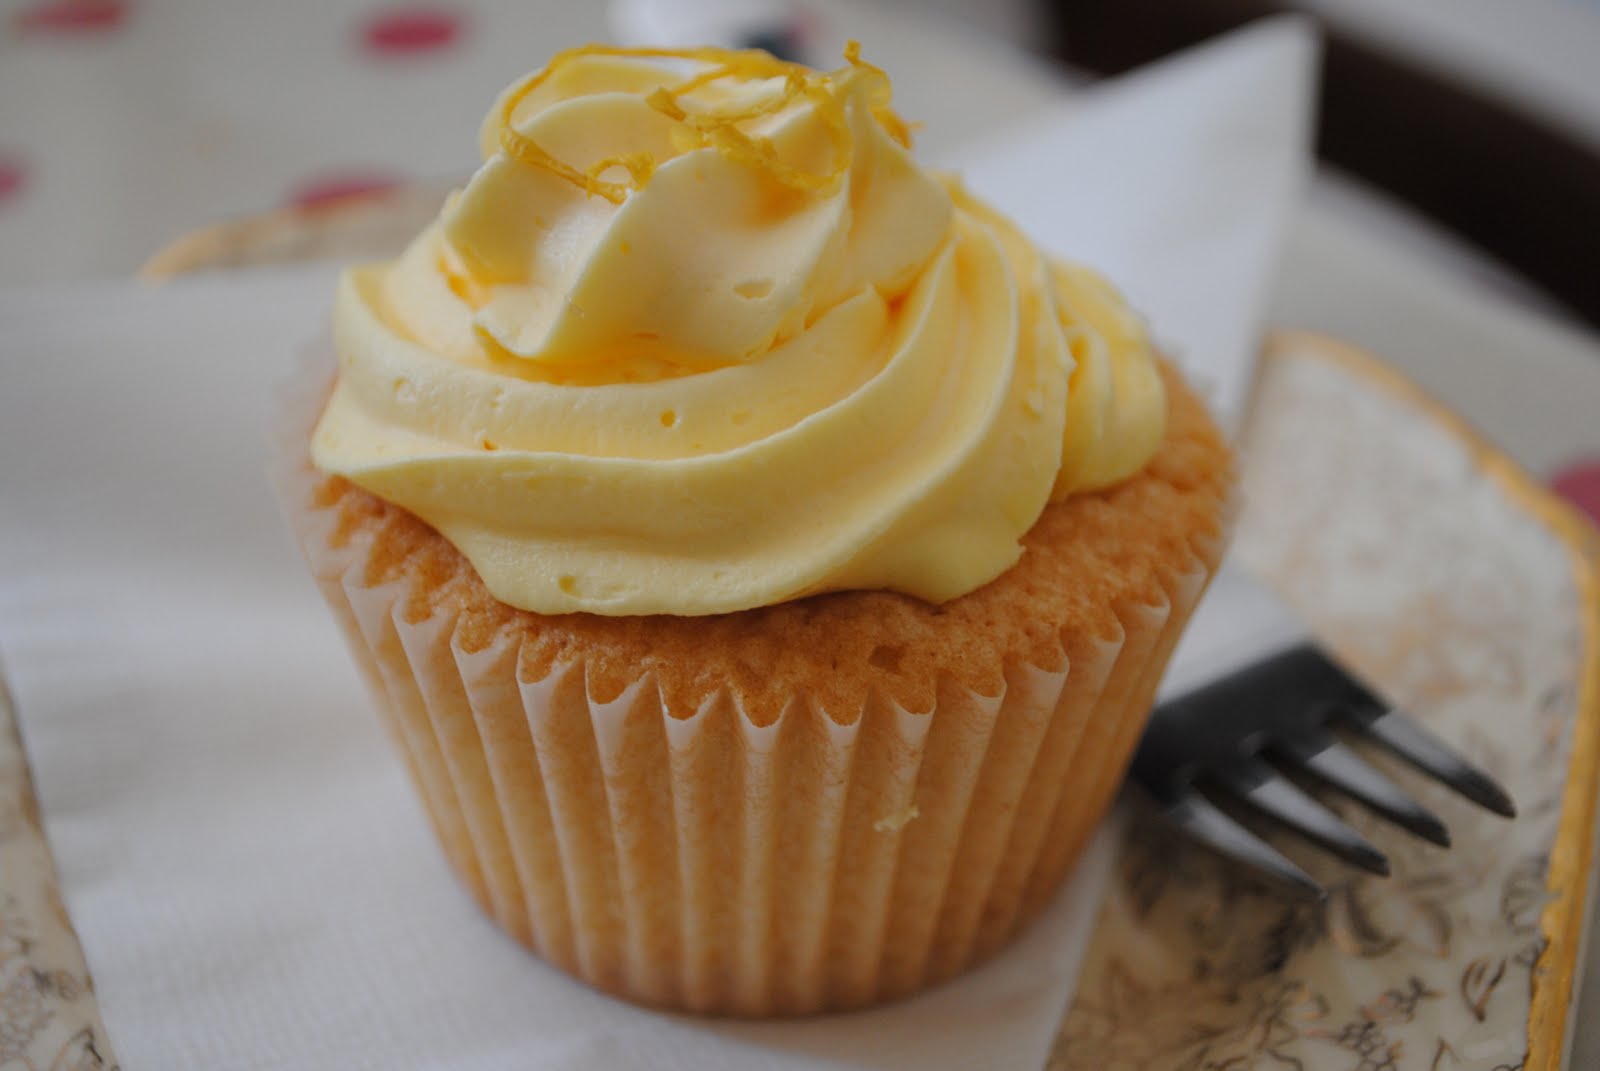 Snipsnaphappy: The Cupcake Cafe